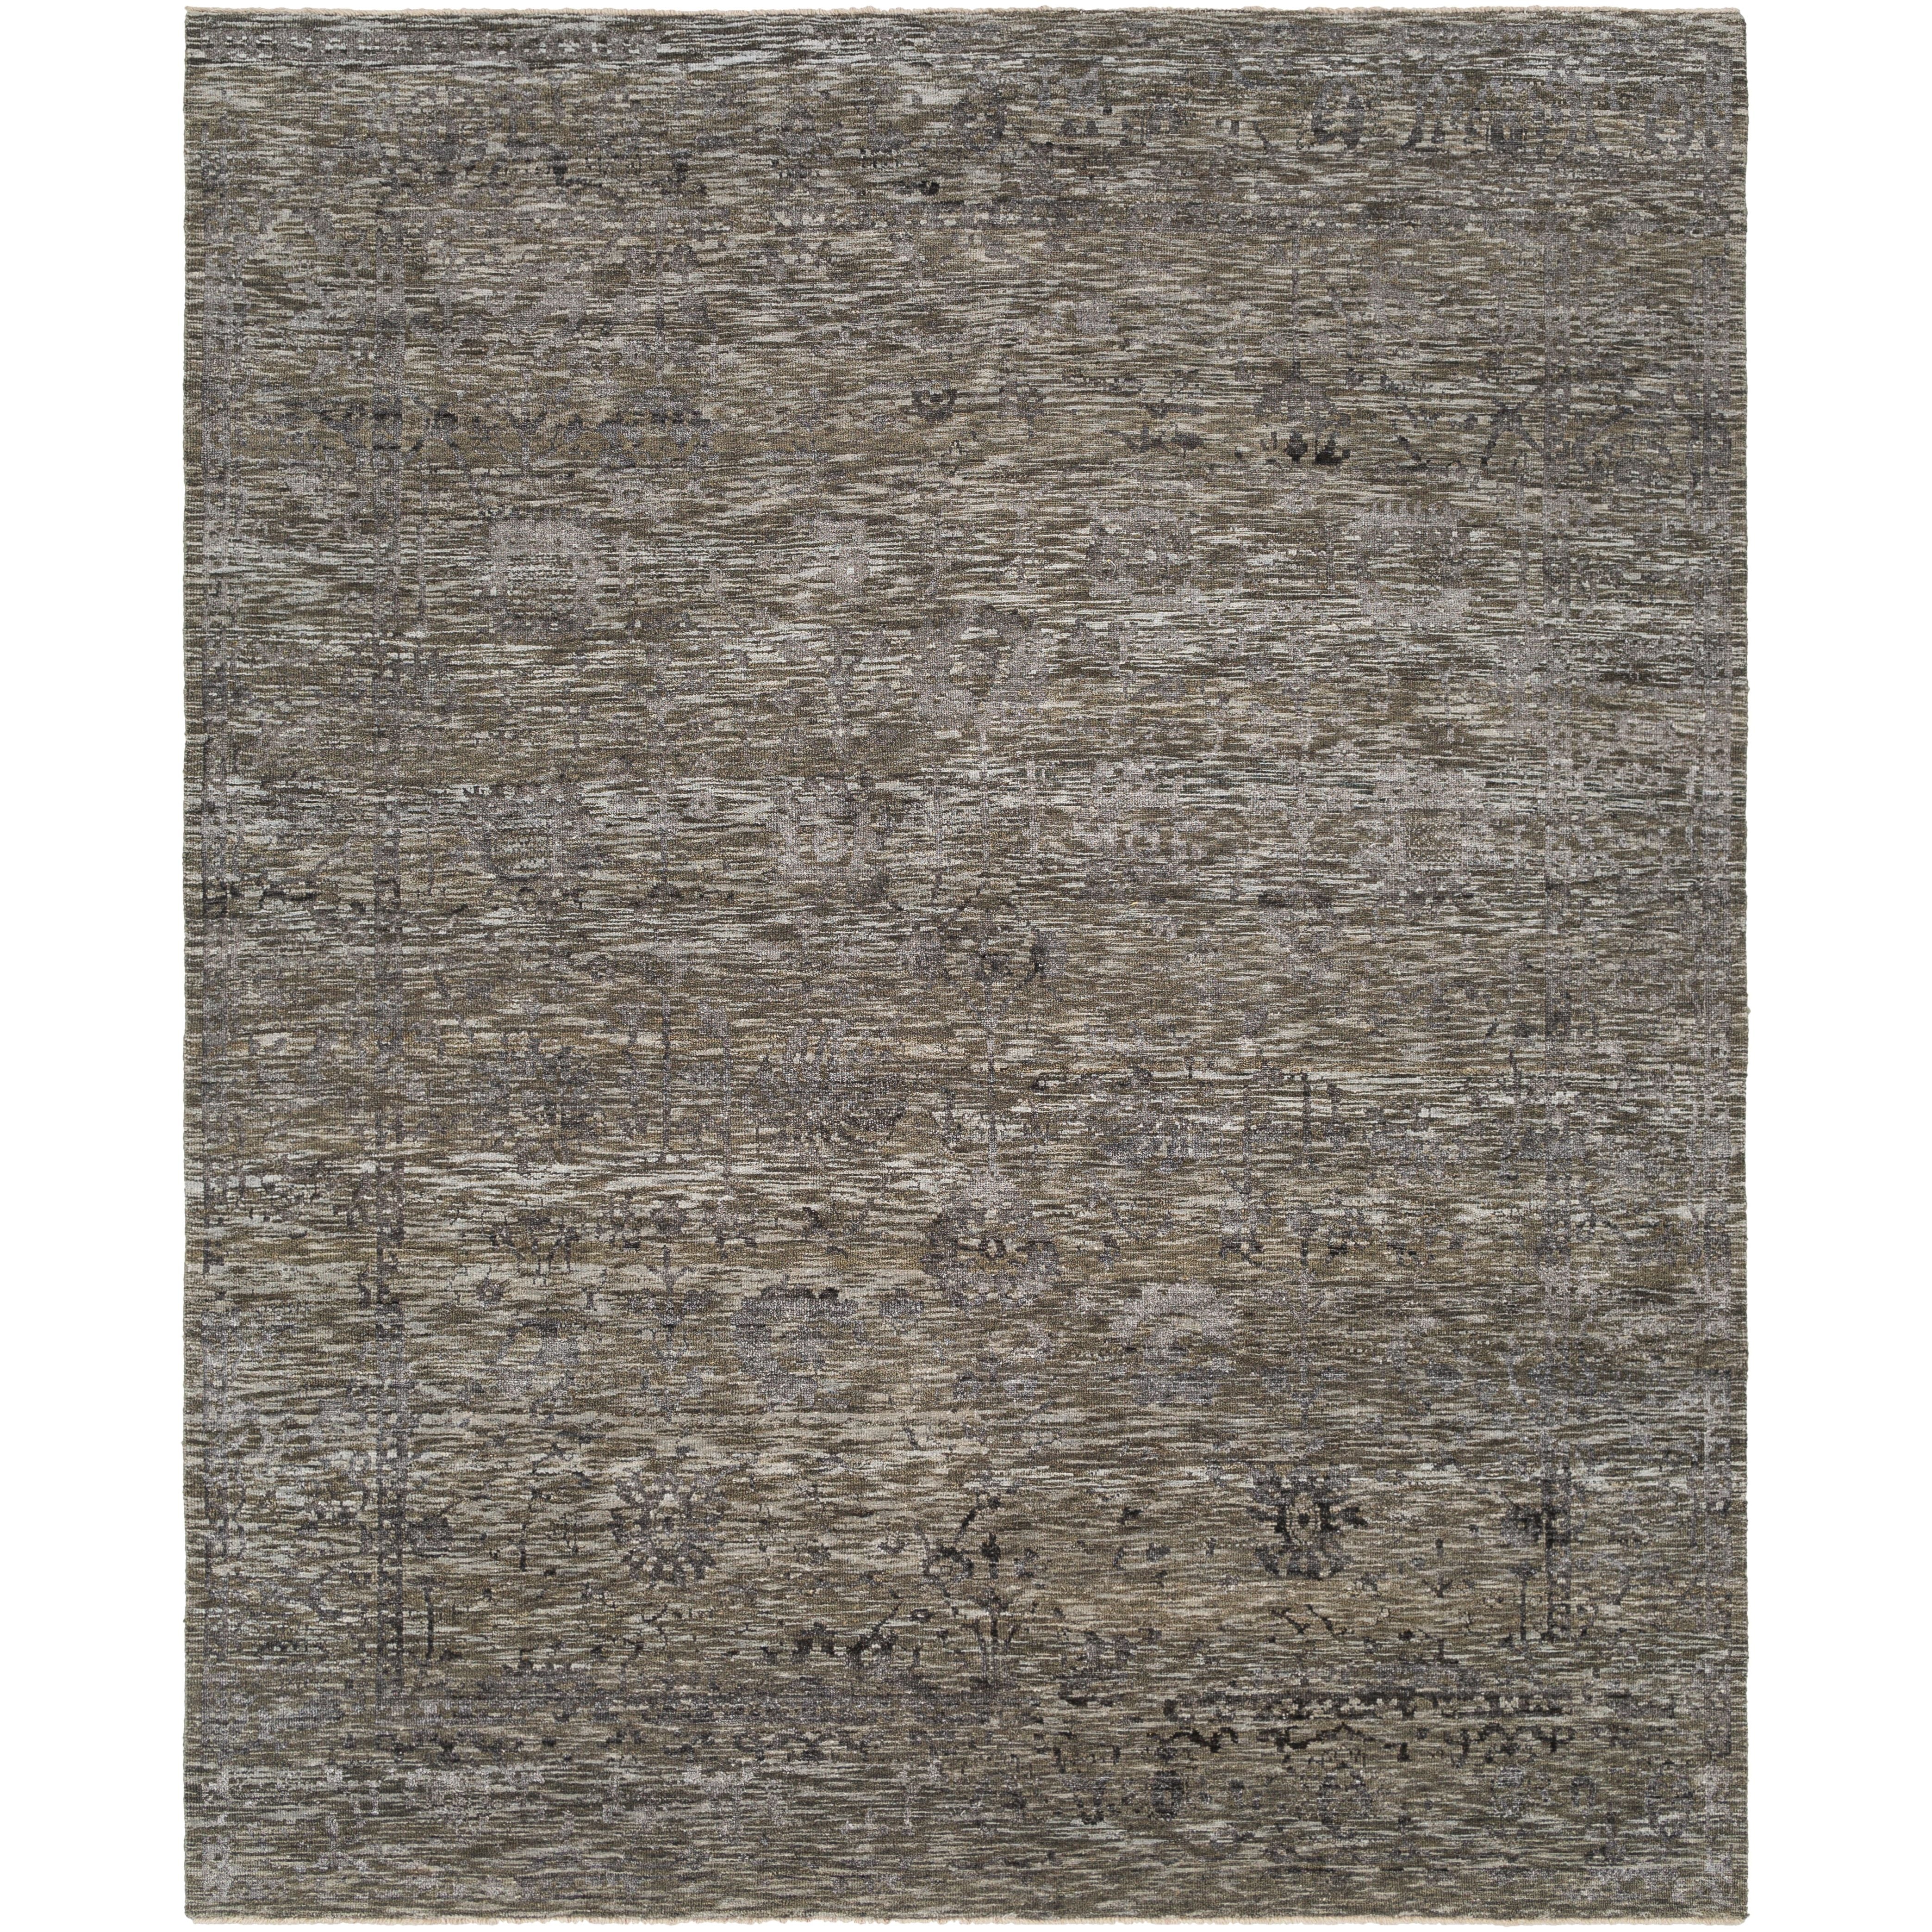 The Tabreez Clark rug traditional inspired designs that timeless styles of comfort, and sophistication. With their Hand-Knotted construction, durability that can not be found in other handmade constructions, and the ability to be cleaned as it contains no chemicals that react to water, such as glue. Made with Wool and Viscose with a Low Pile. One Year Limited Warranty. Amethyst Home provides interior design, new home construction design consulting, vintage area rugs, and lighting in the Denver  metro area.